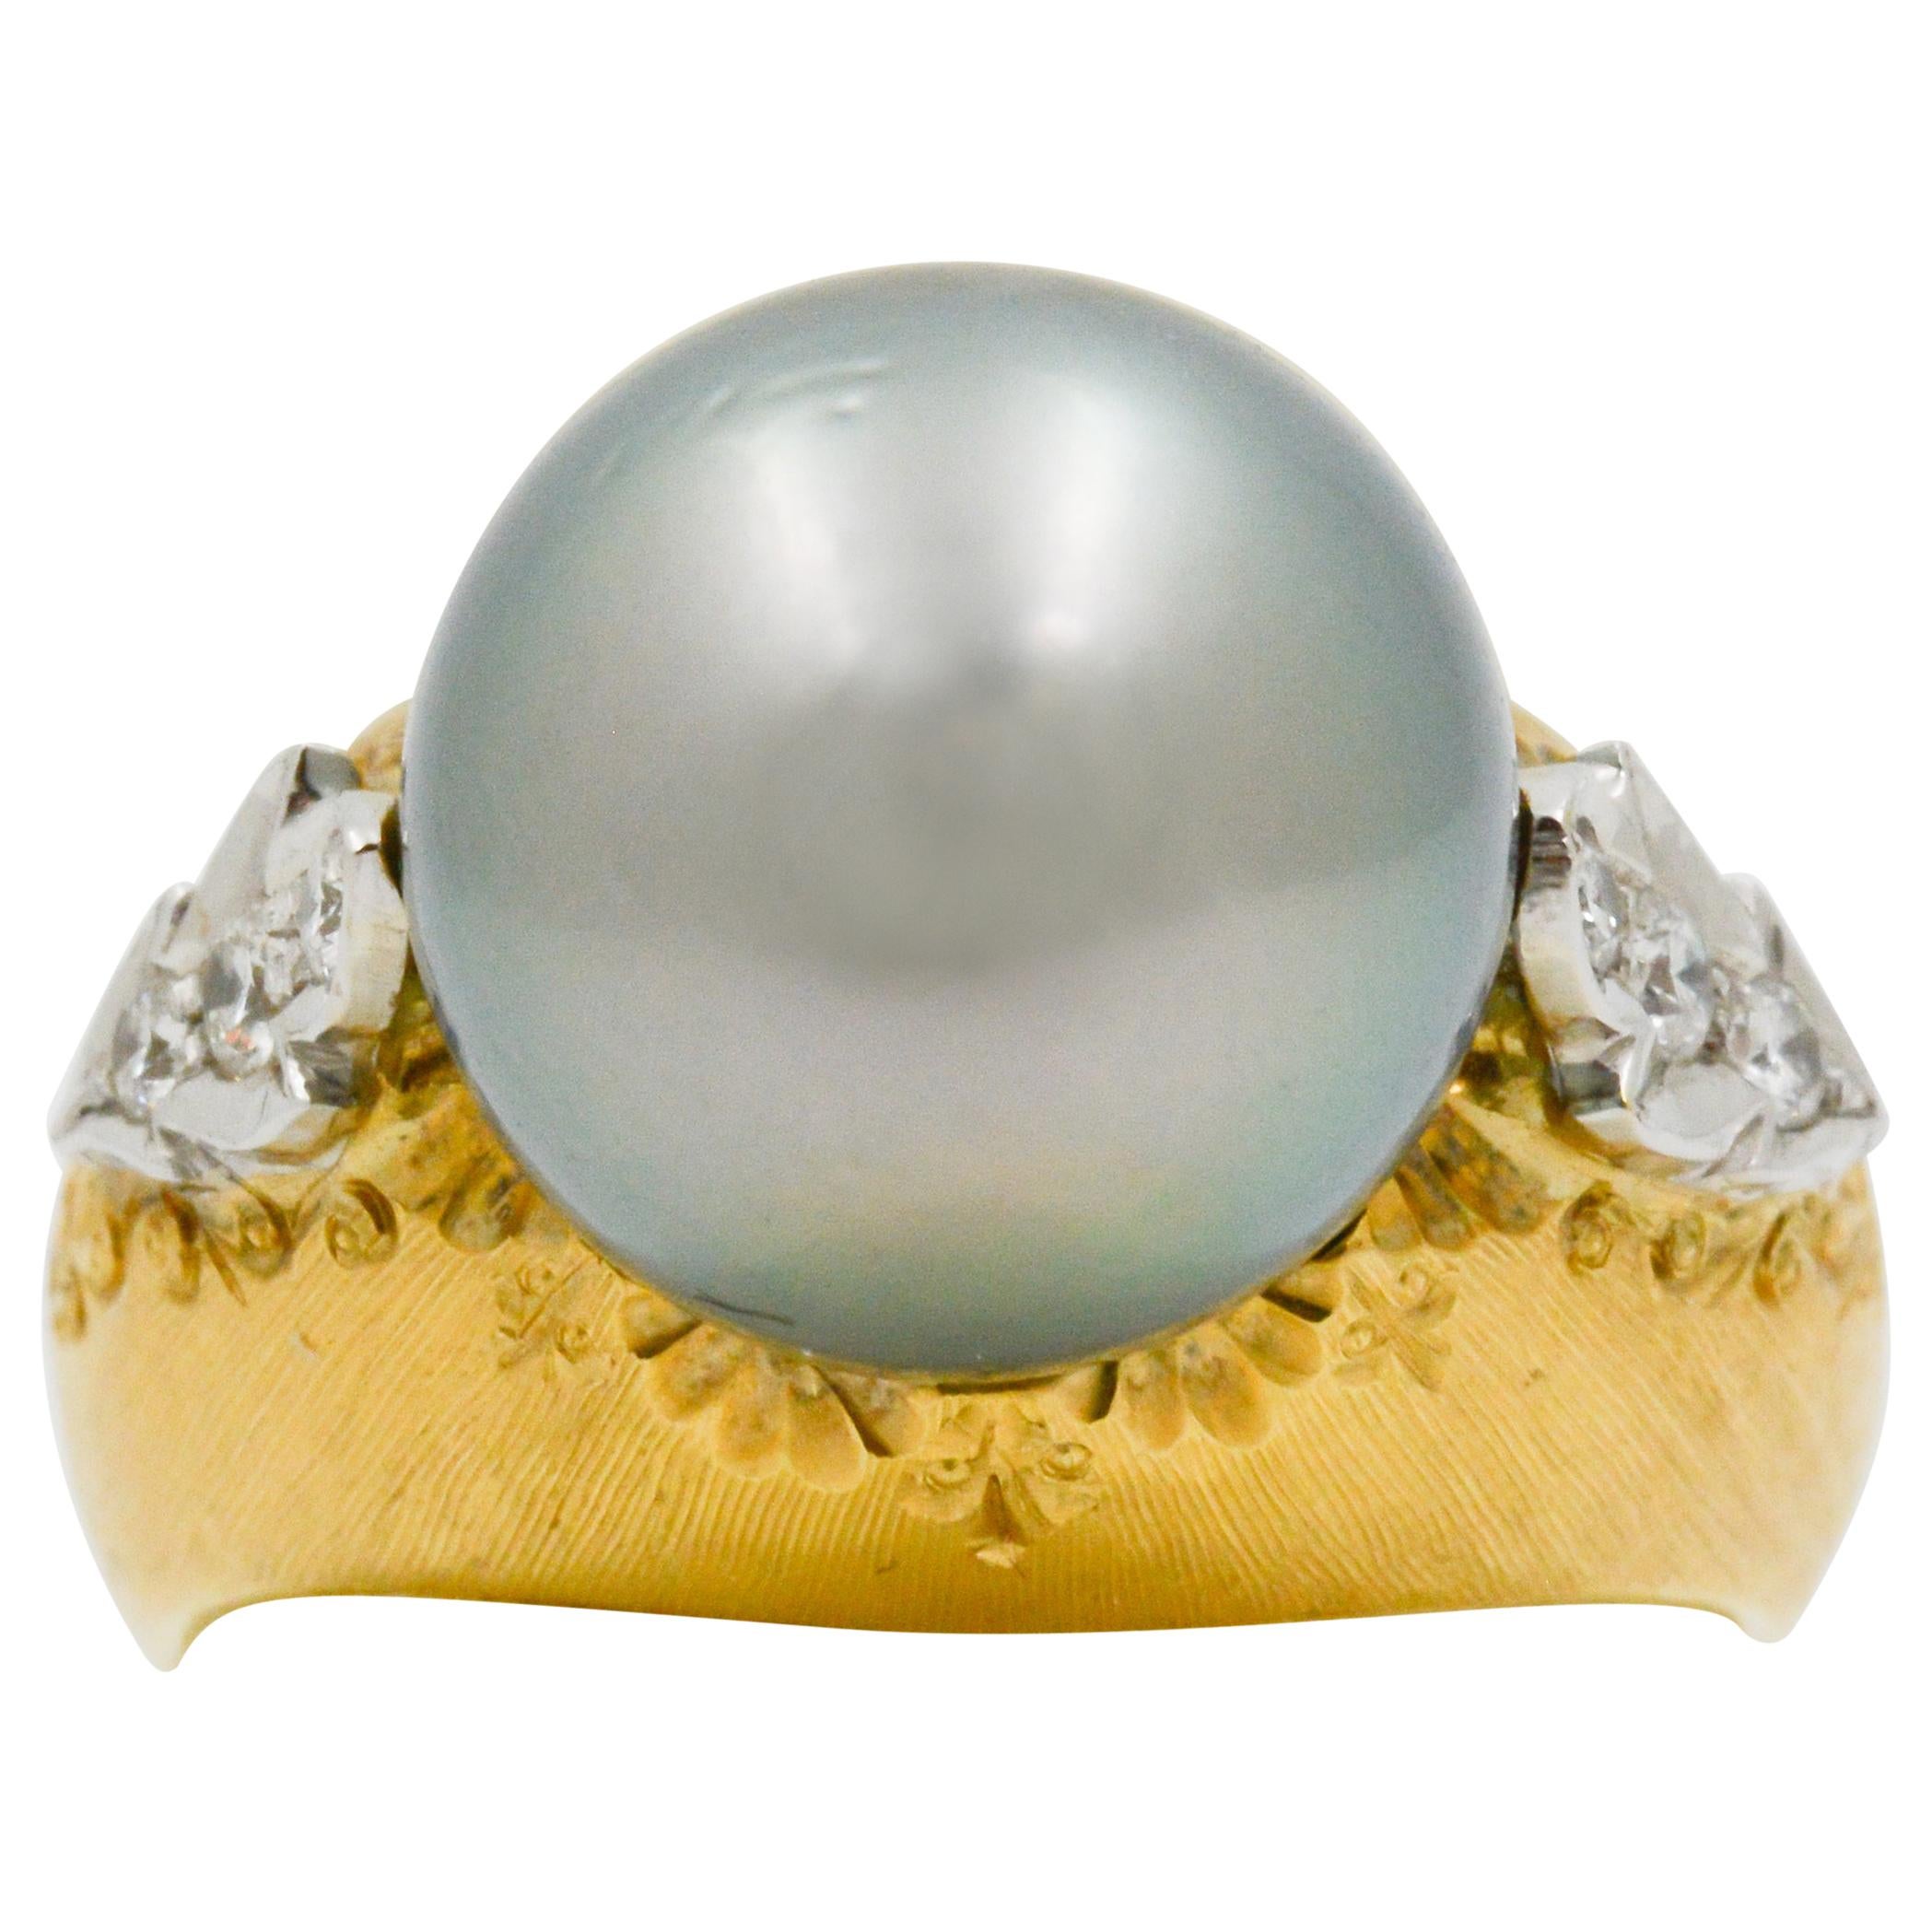 This 18k yellow gold ring features a medium Tahitian grey south sea pearl that is accented by six round brilliant cut diamonds on either side, weighing a total of .14 carats. Surrounding the pearl and diamonds is a scroll work design that adds